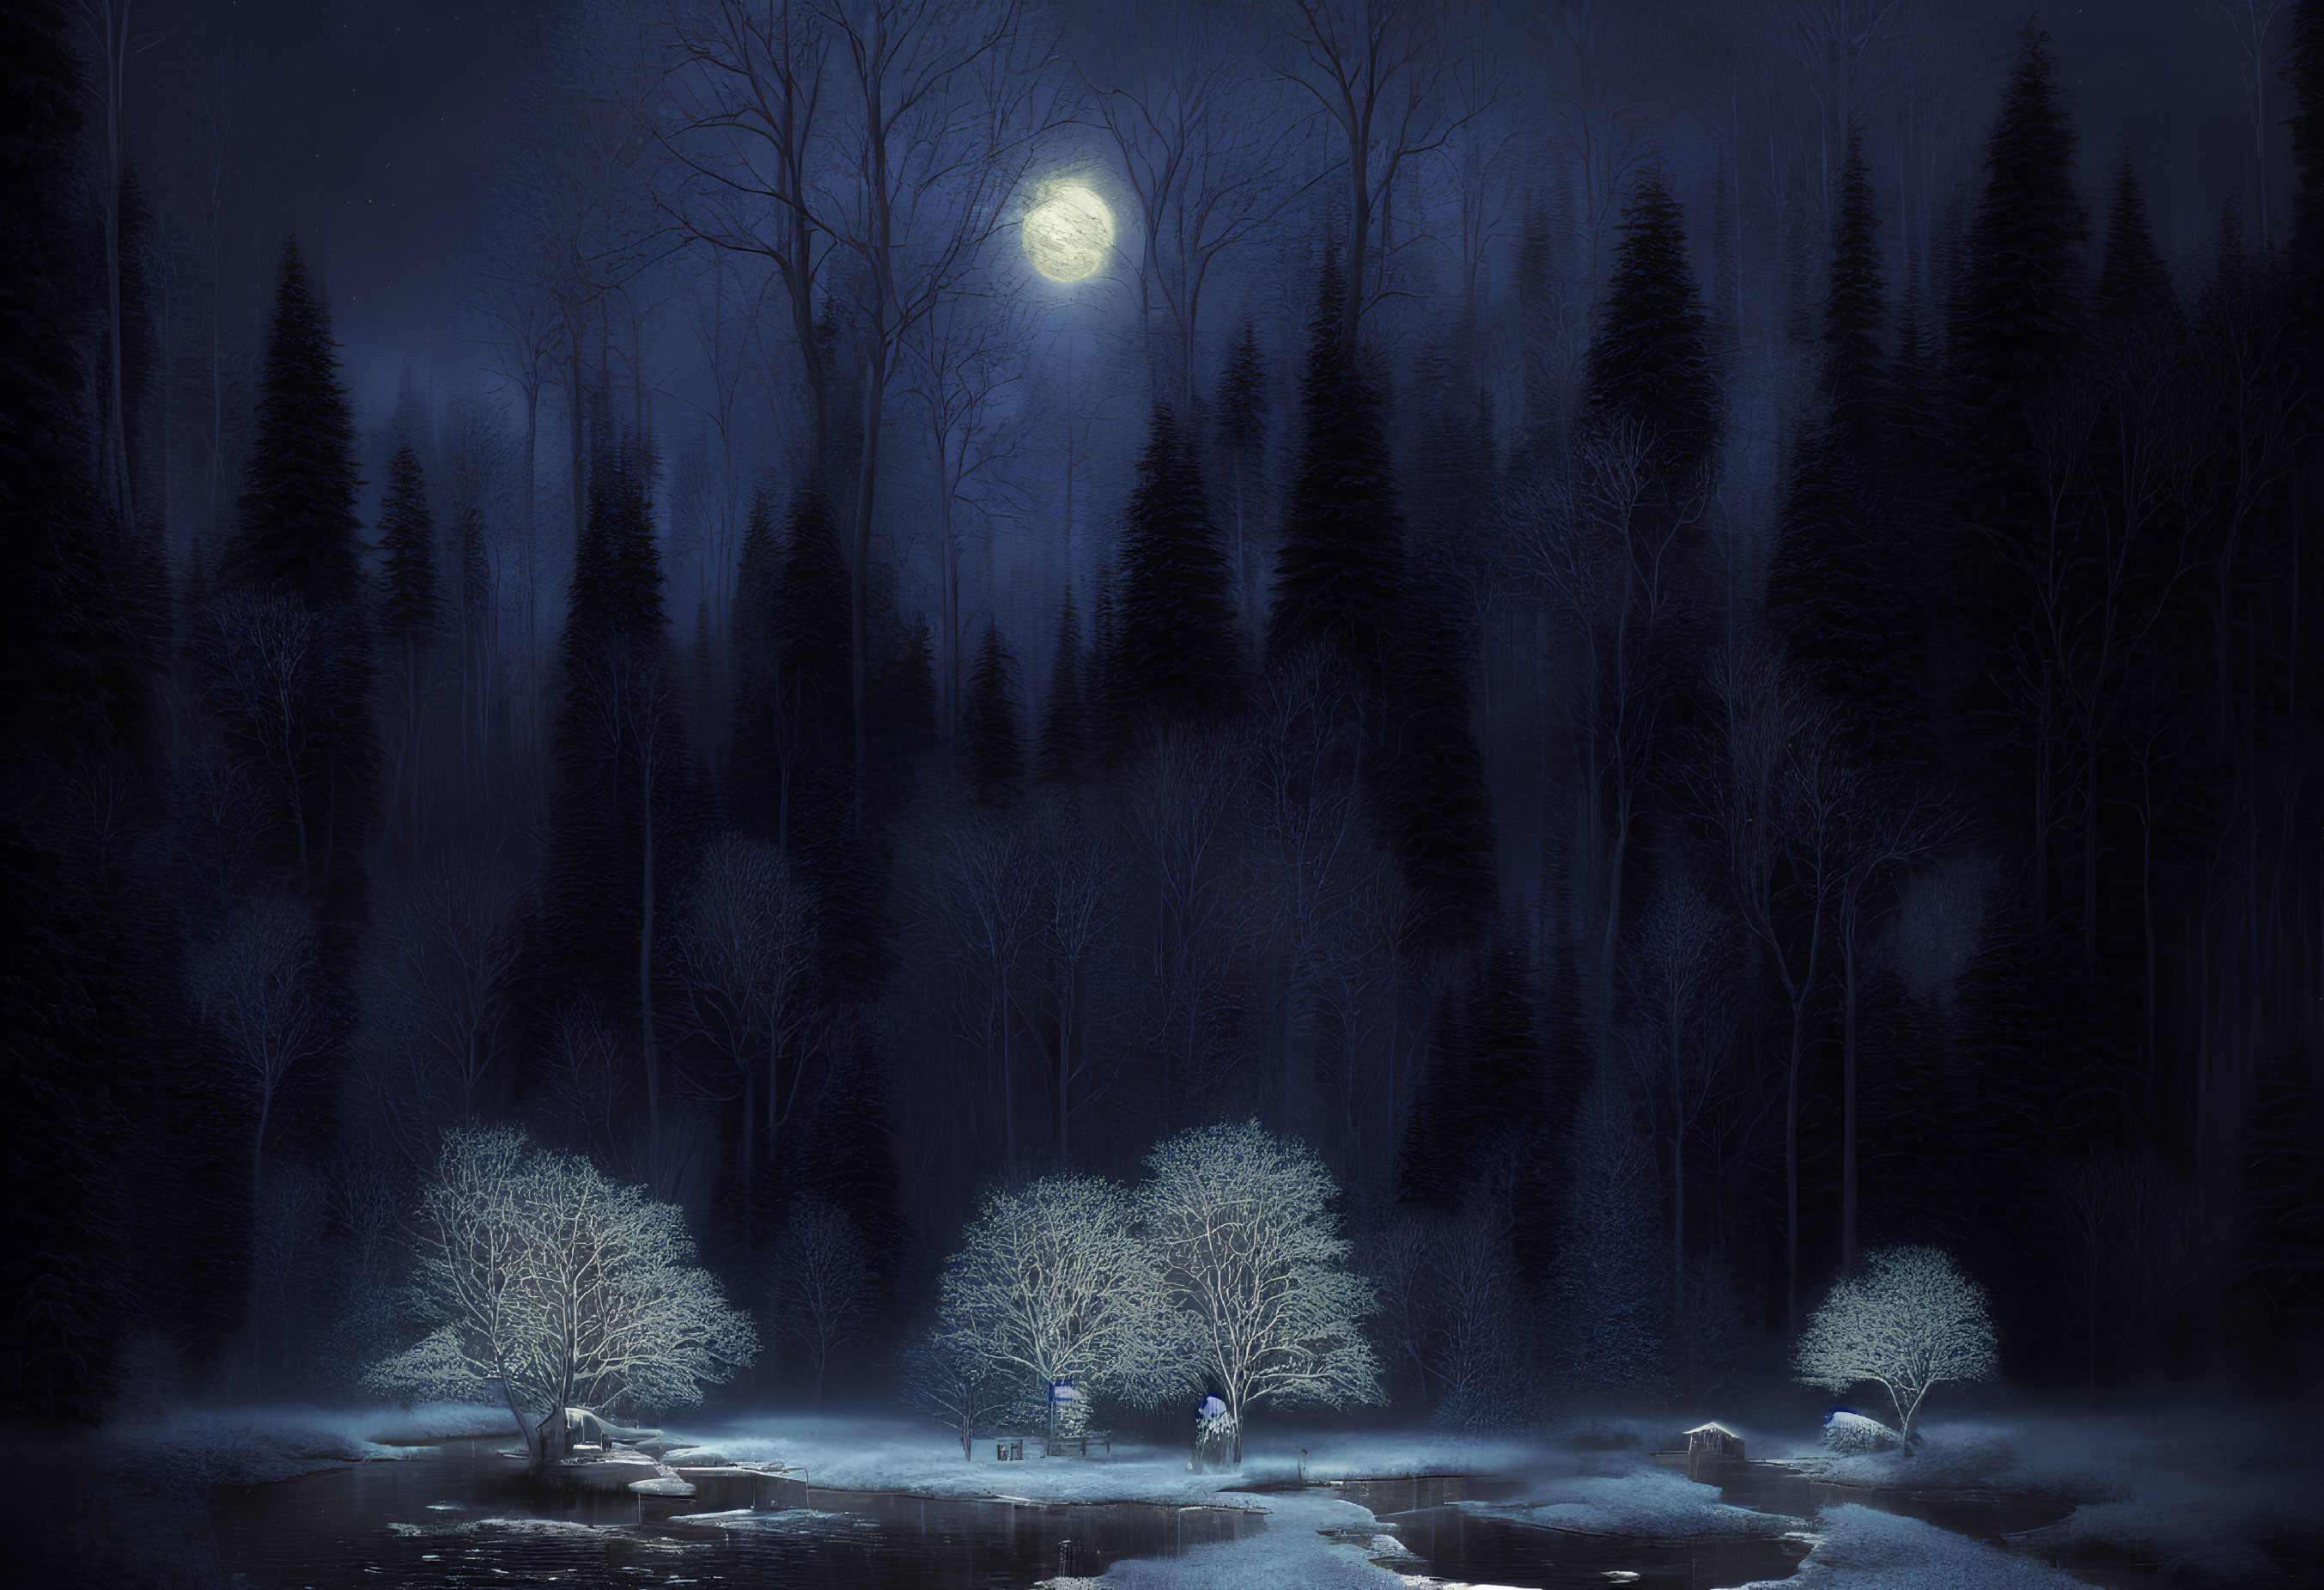 Tranquil forest scene under full moon and snow-covered trees